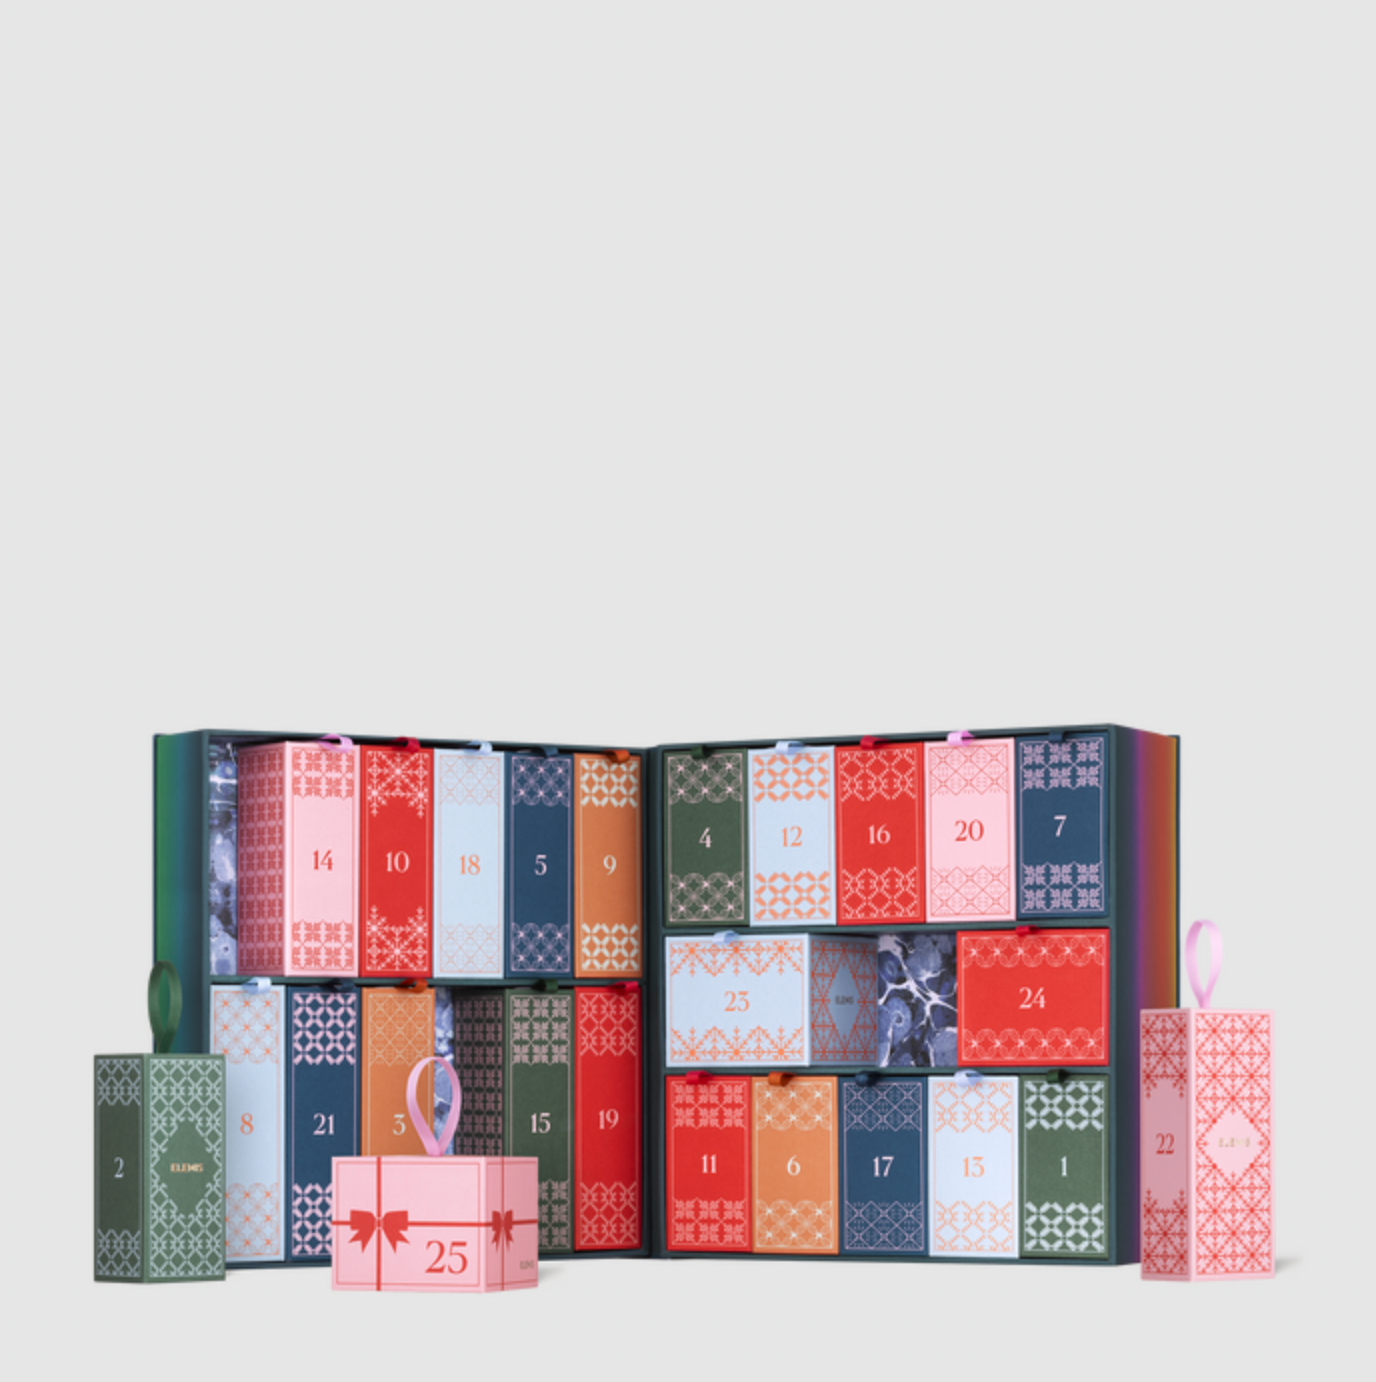 ELEMIS Skin Wellness Advent Calendar: The Complete Collection